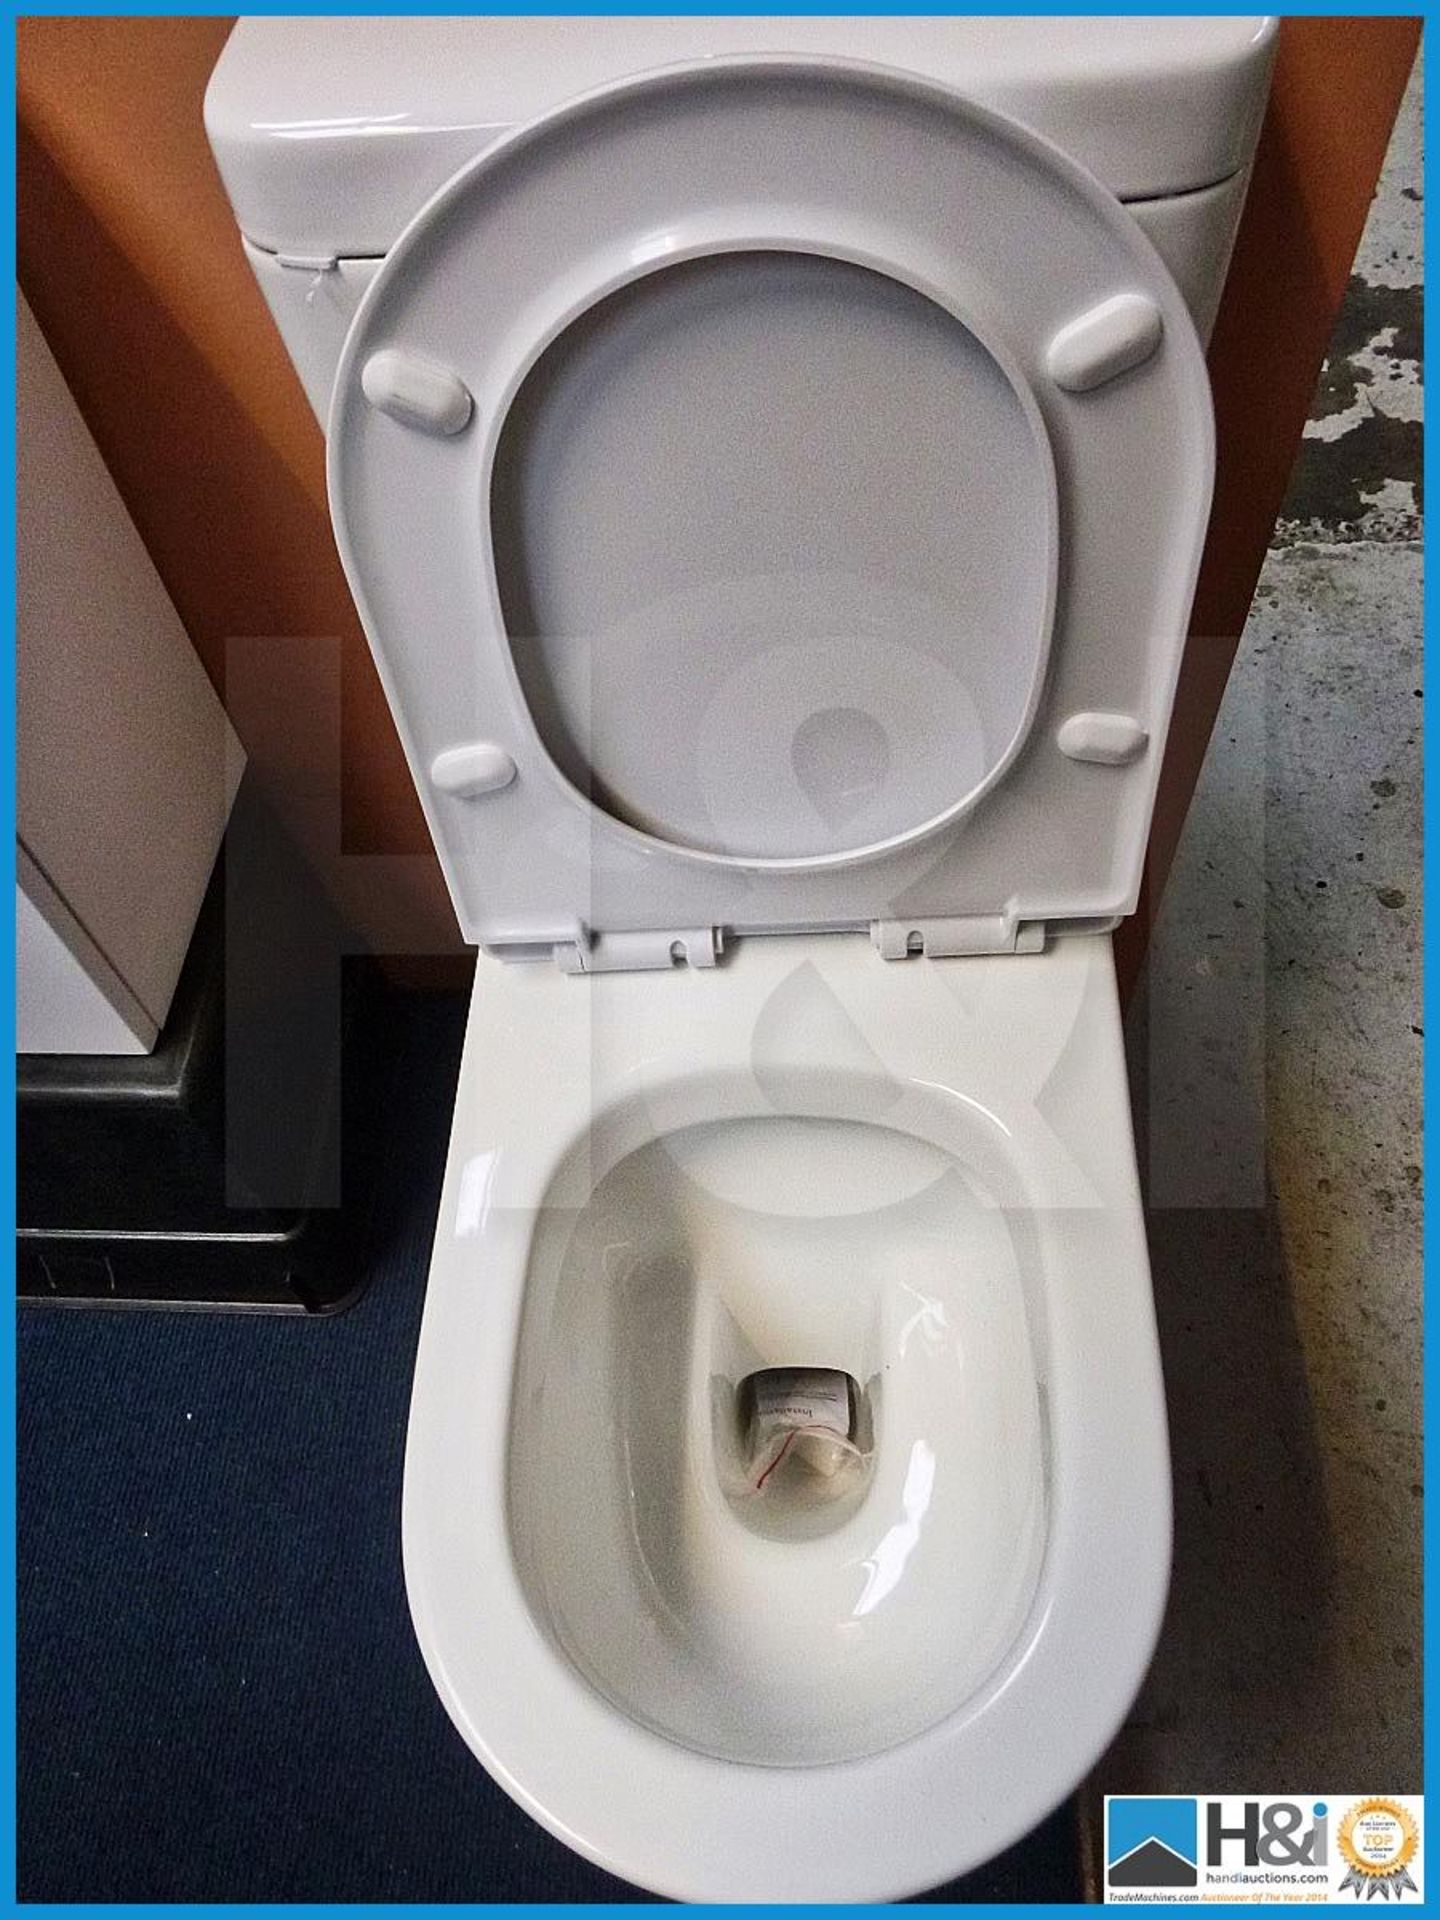 Luxury K 008 Full facia vitreous china close coupled toilet. Complete with clean easy soft close sea - Image 3 of 5